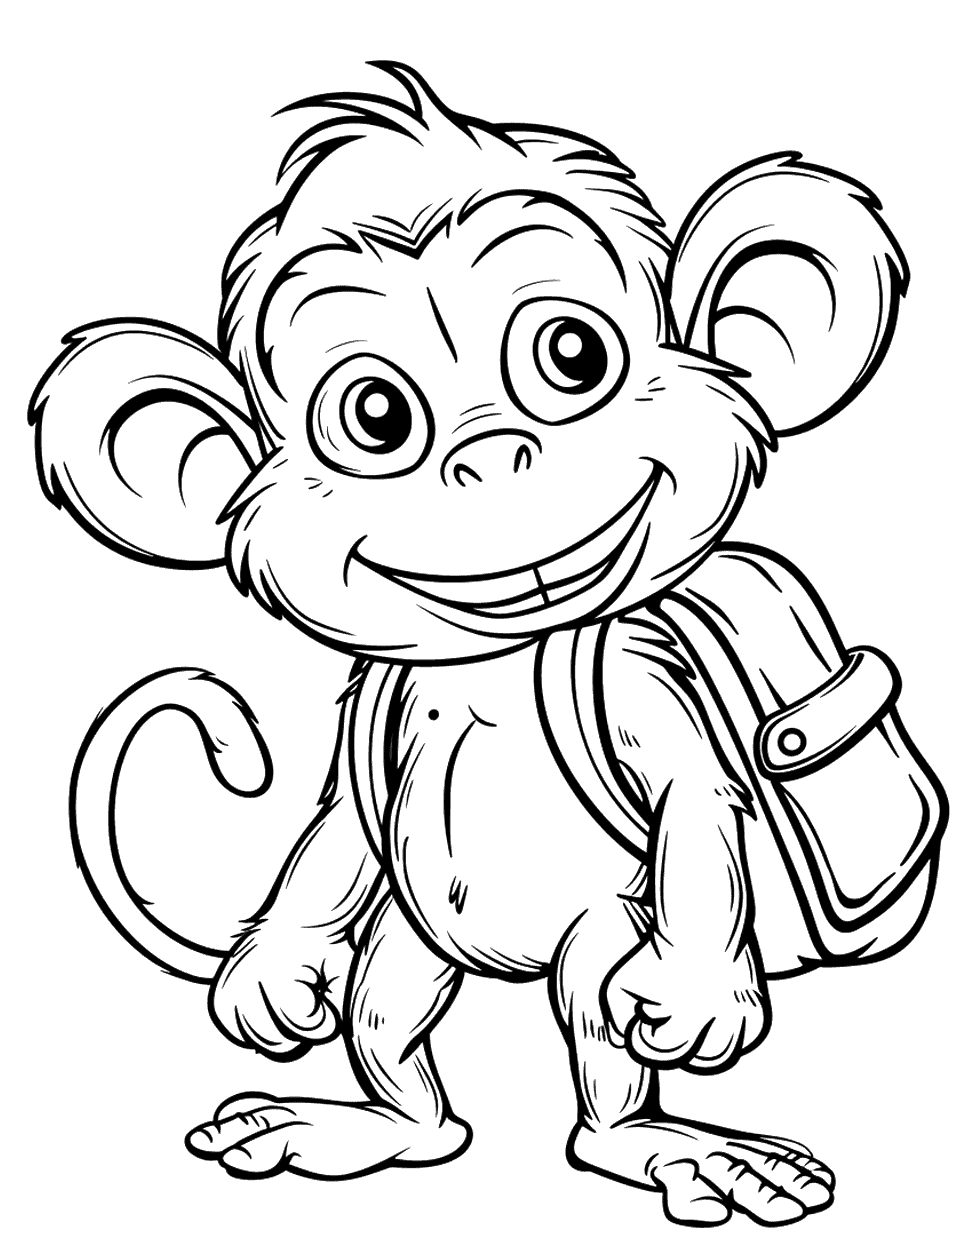 Monkey With a Backpack Coloring Page - A monkey ready for adventure, wearing a small backpack.